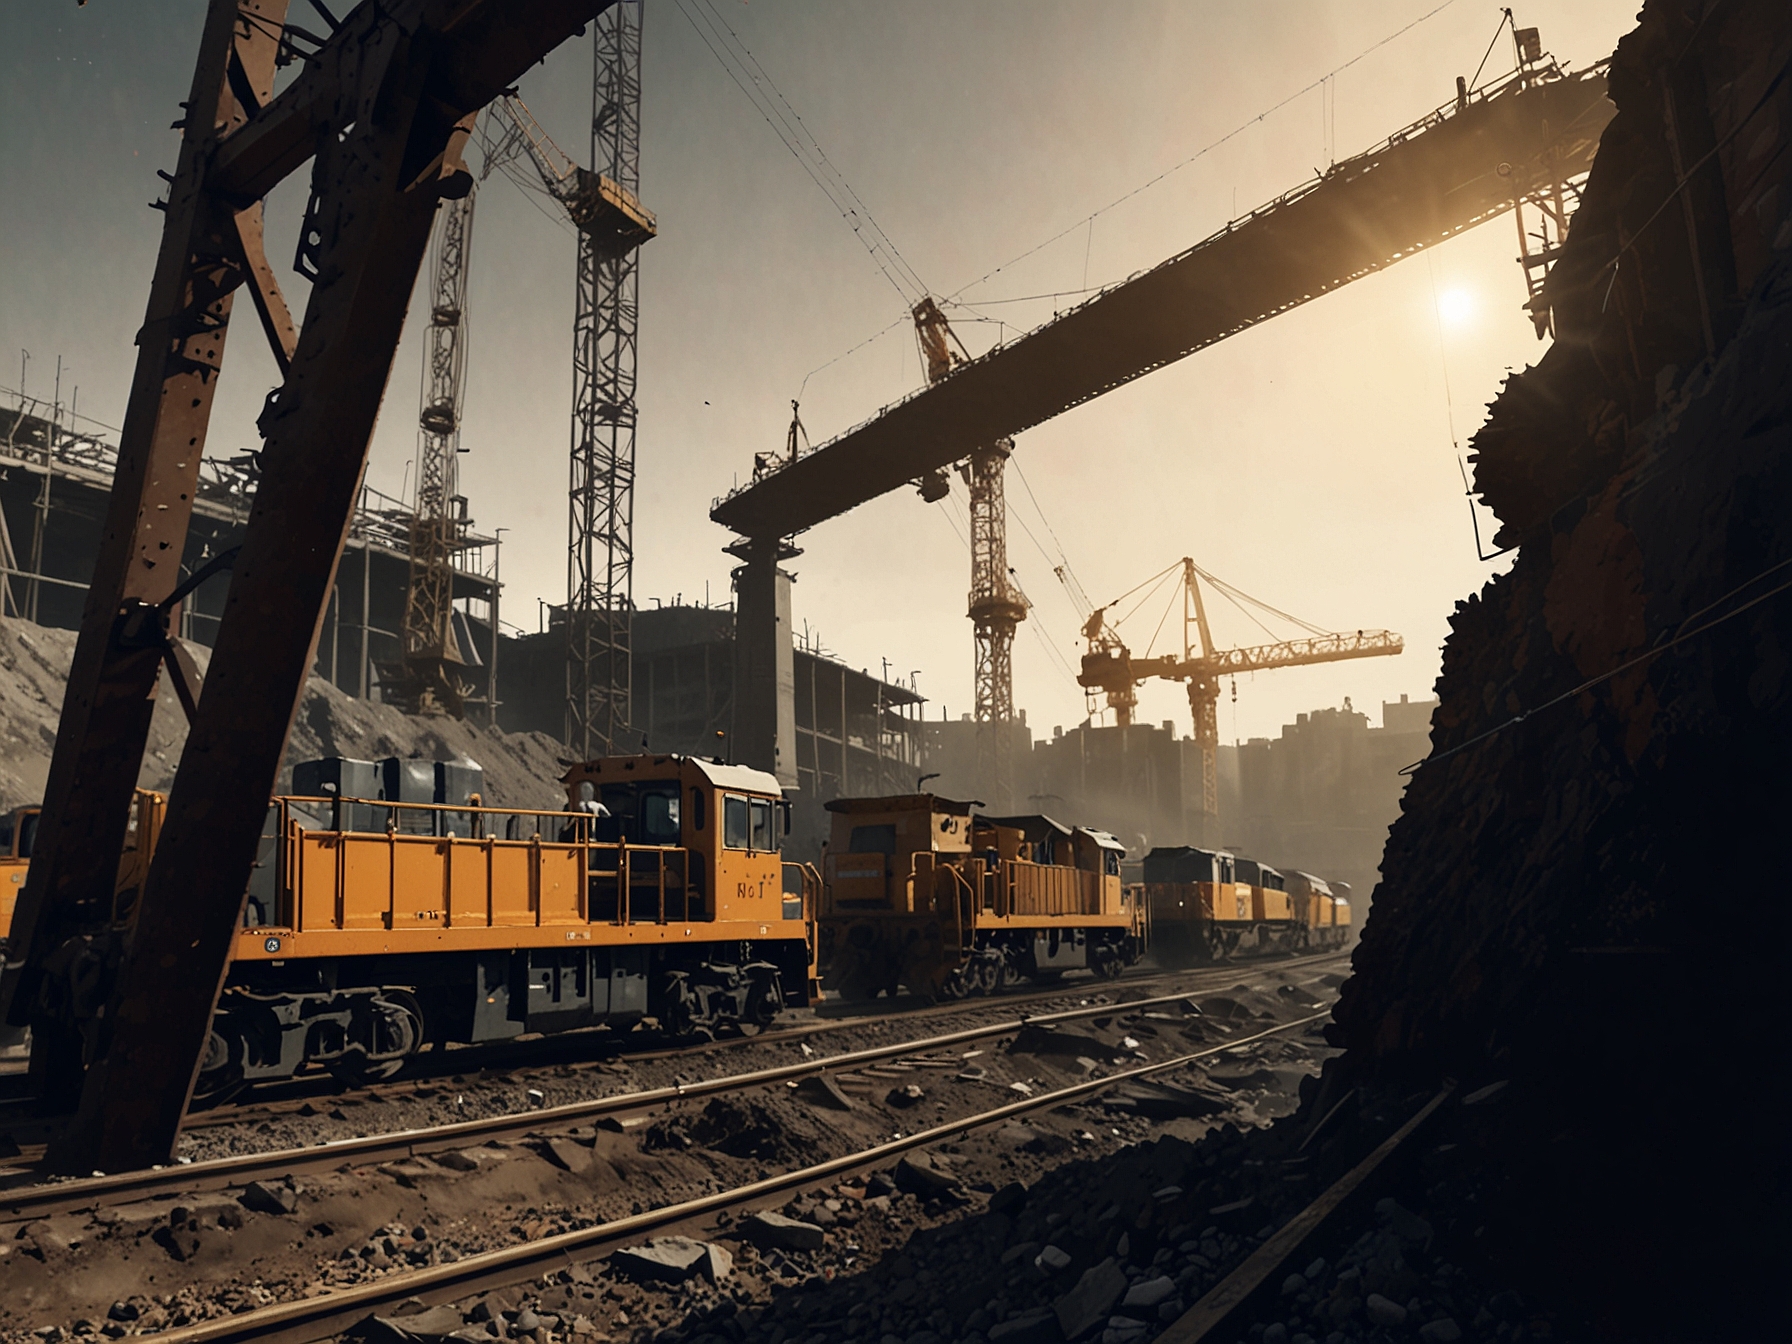 The image captures a bustling railway construction site, symbolizing RVNL's ongoing projects and success in securing high-value contracts, contributing to its recent stock price increase.